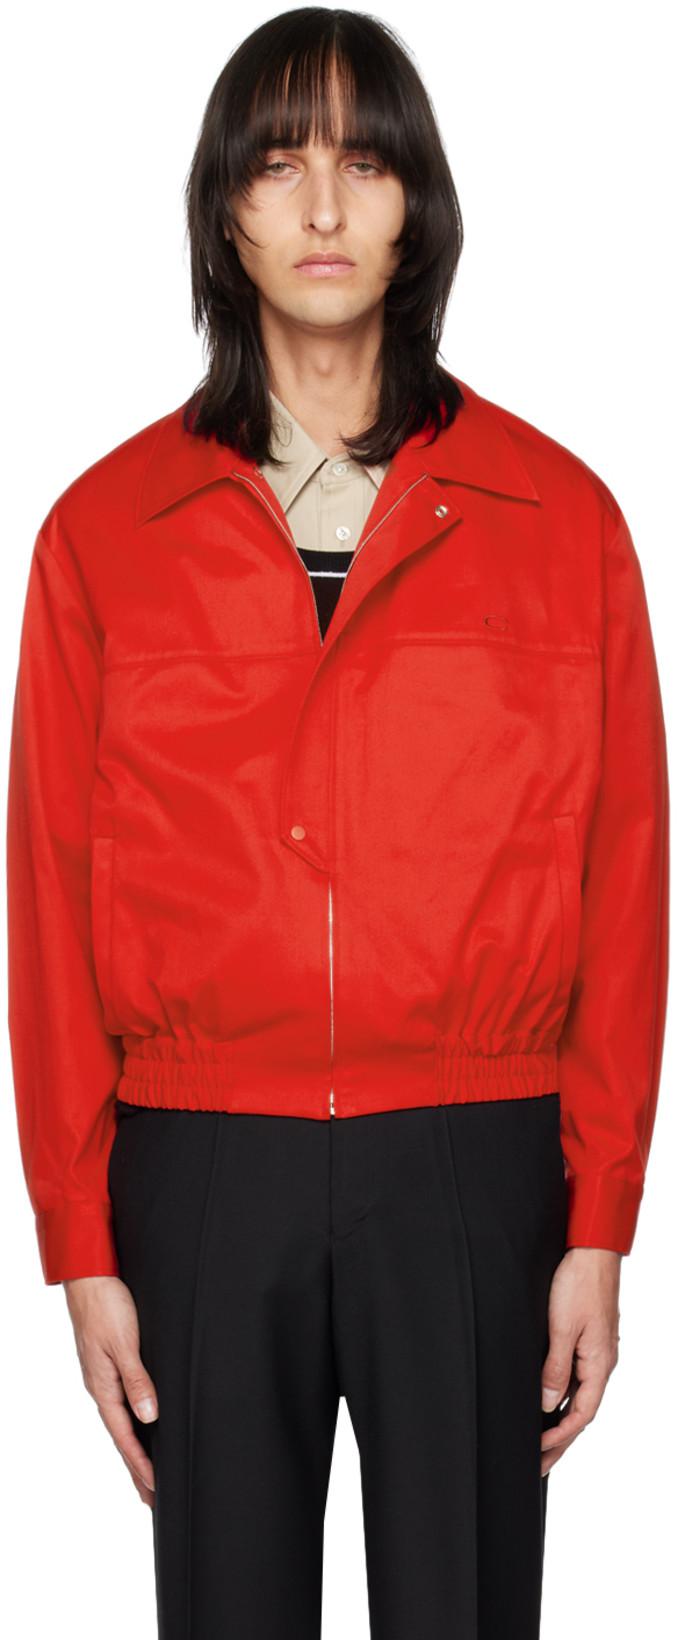 SSENSE Exclusive Red Coach Bomber Jacket by COMMISSION